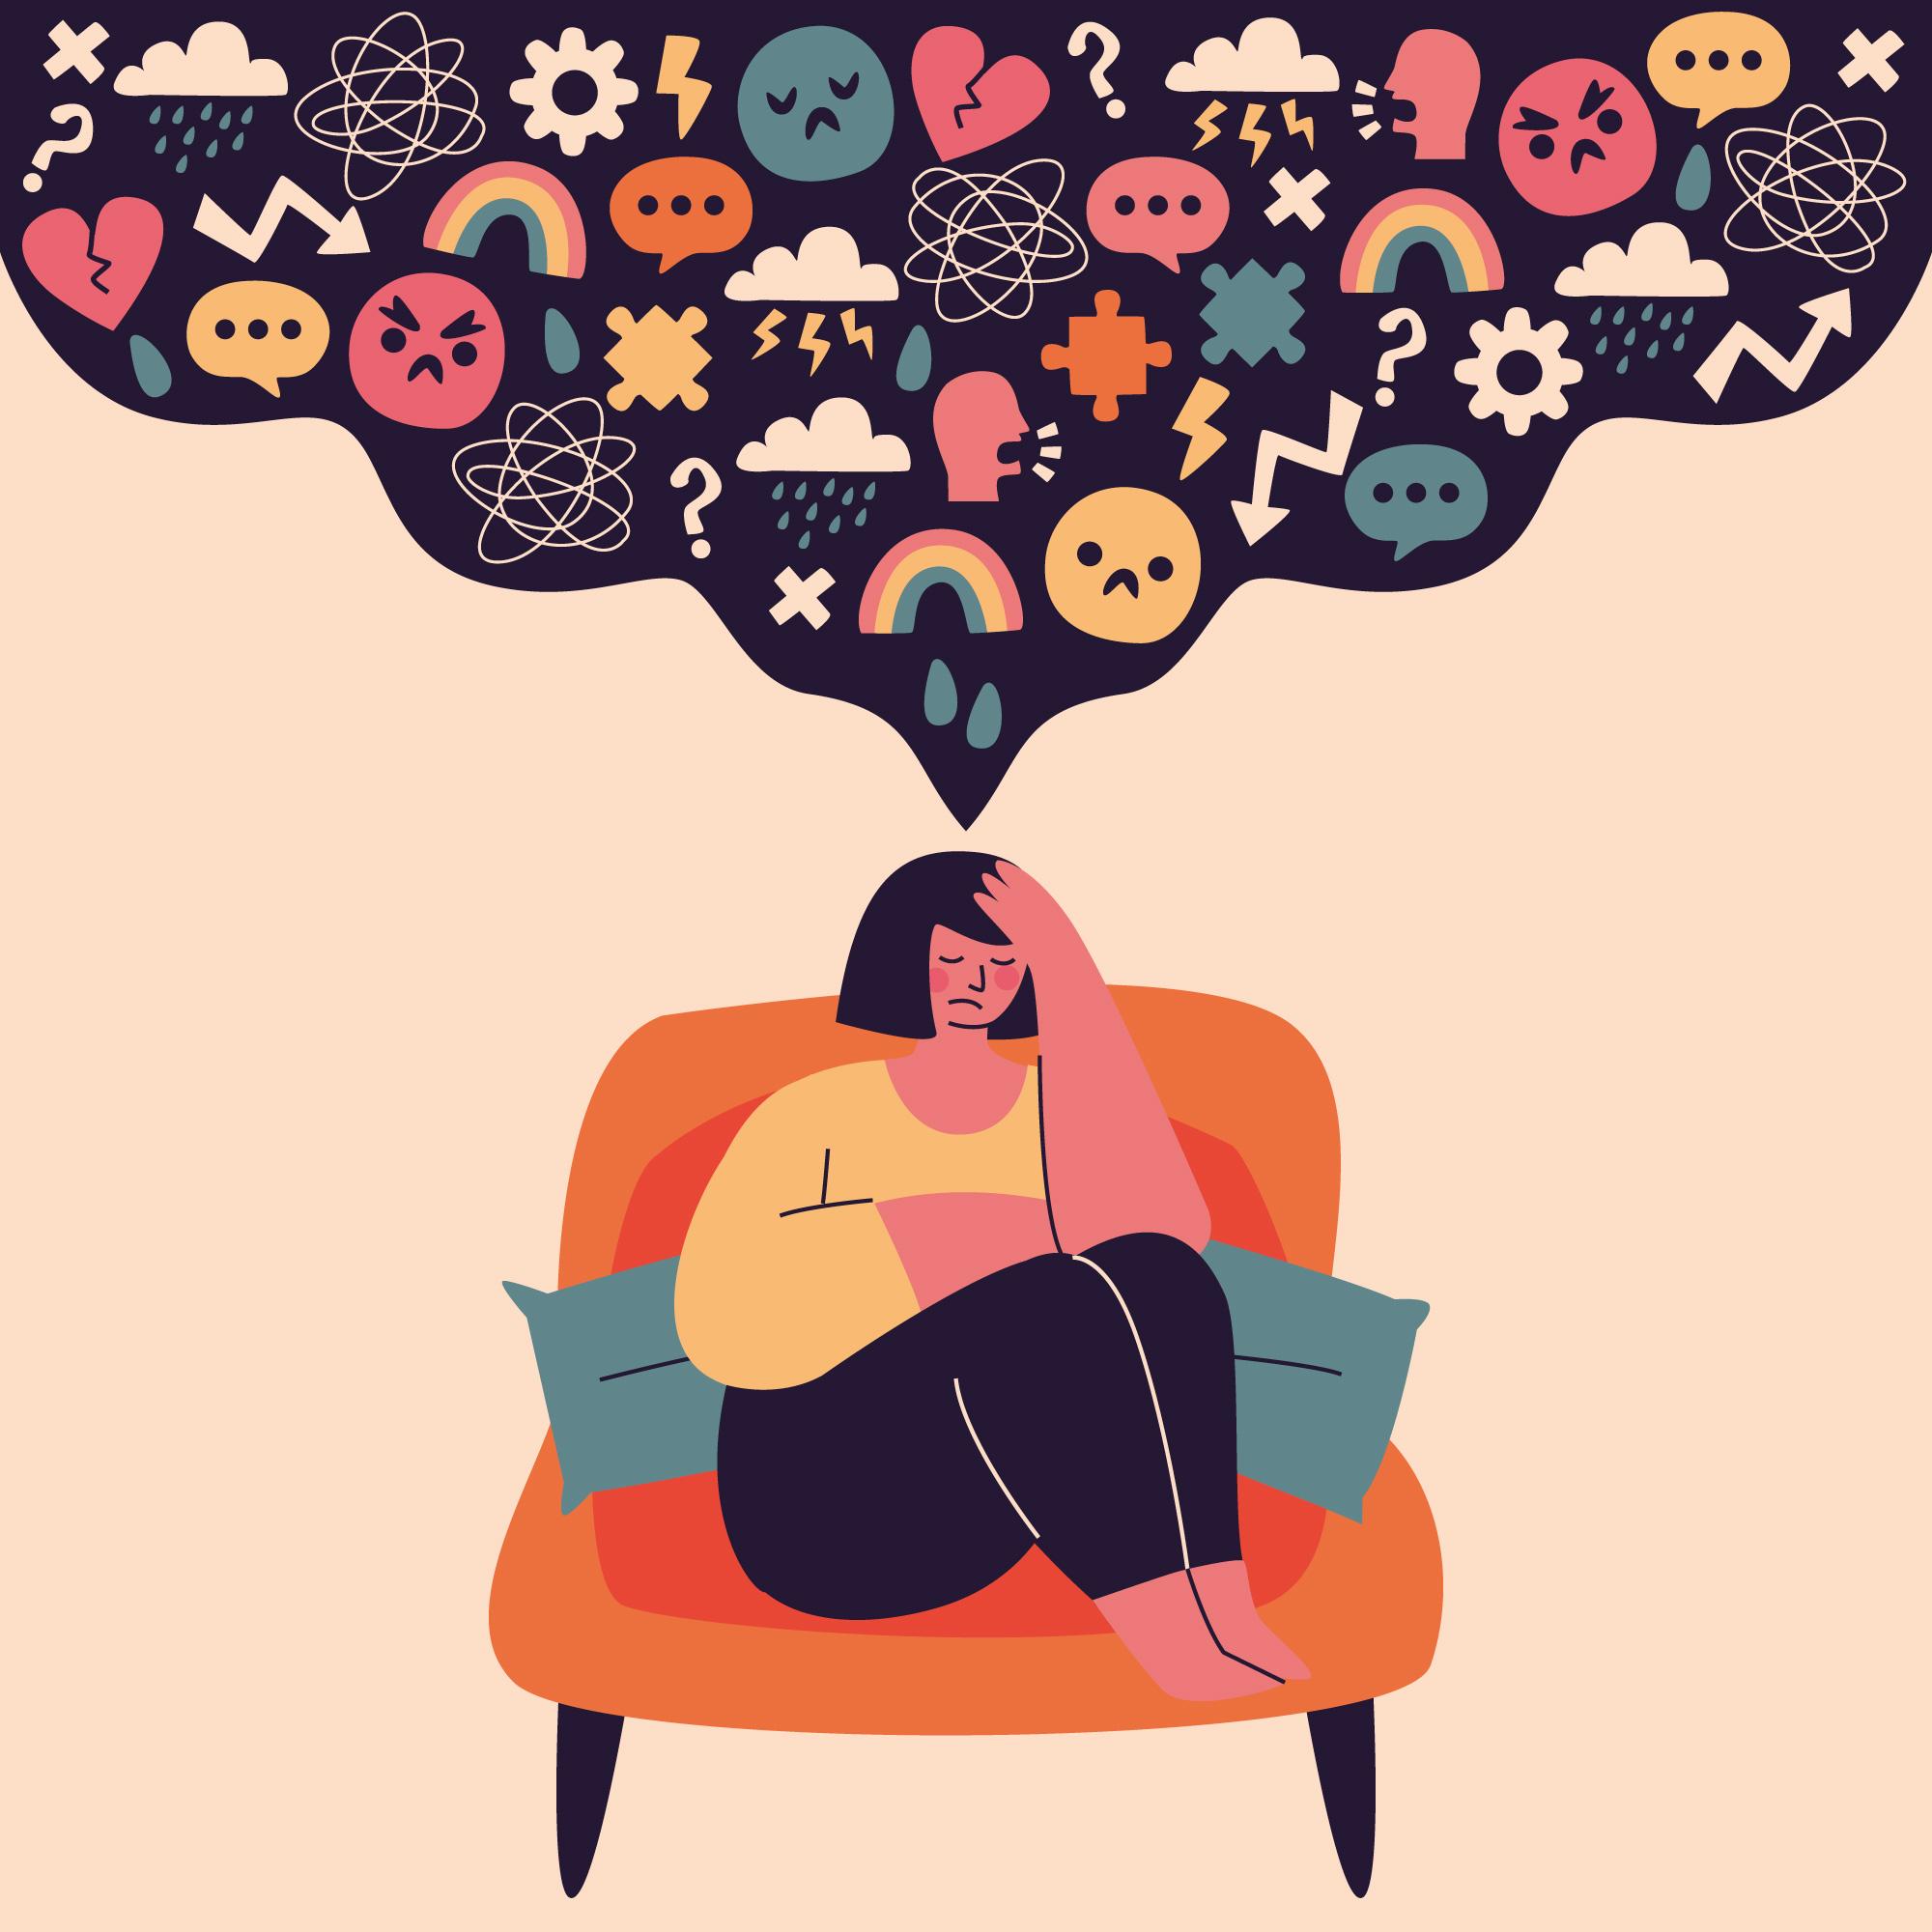 Individual with thought bubble full of positive and stressful icons